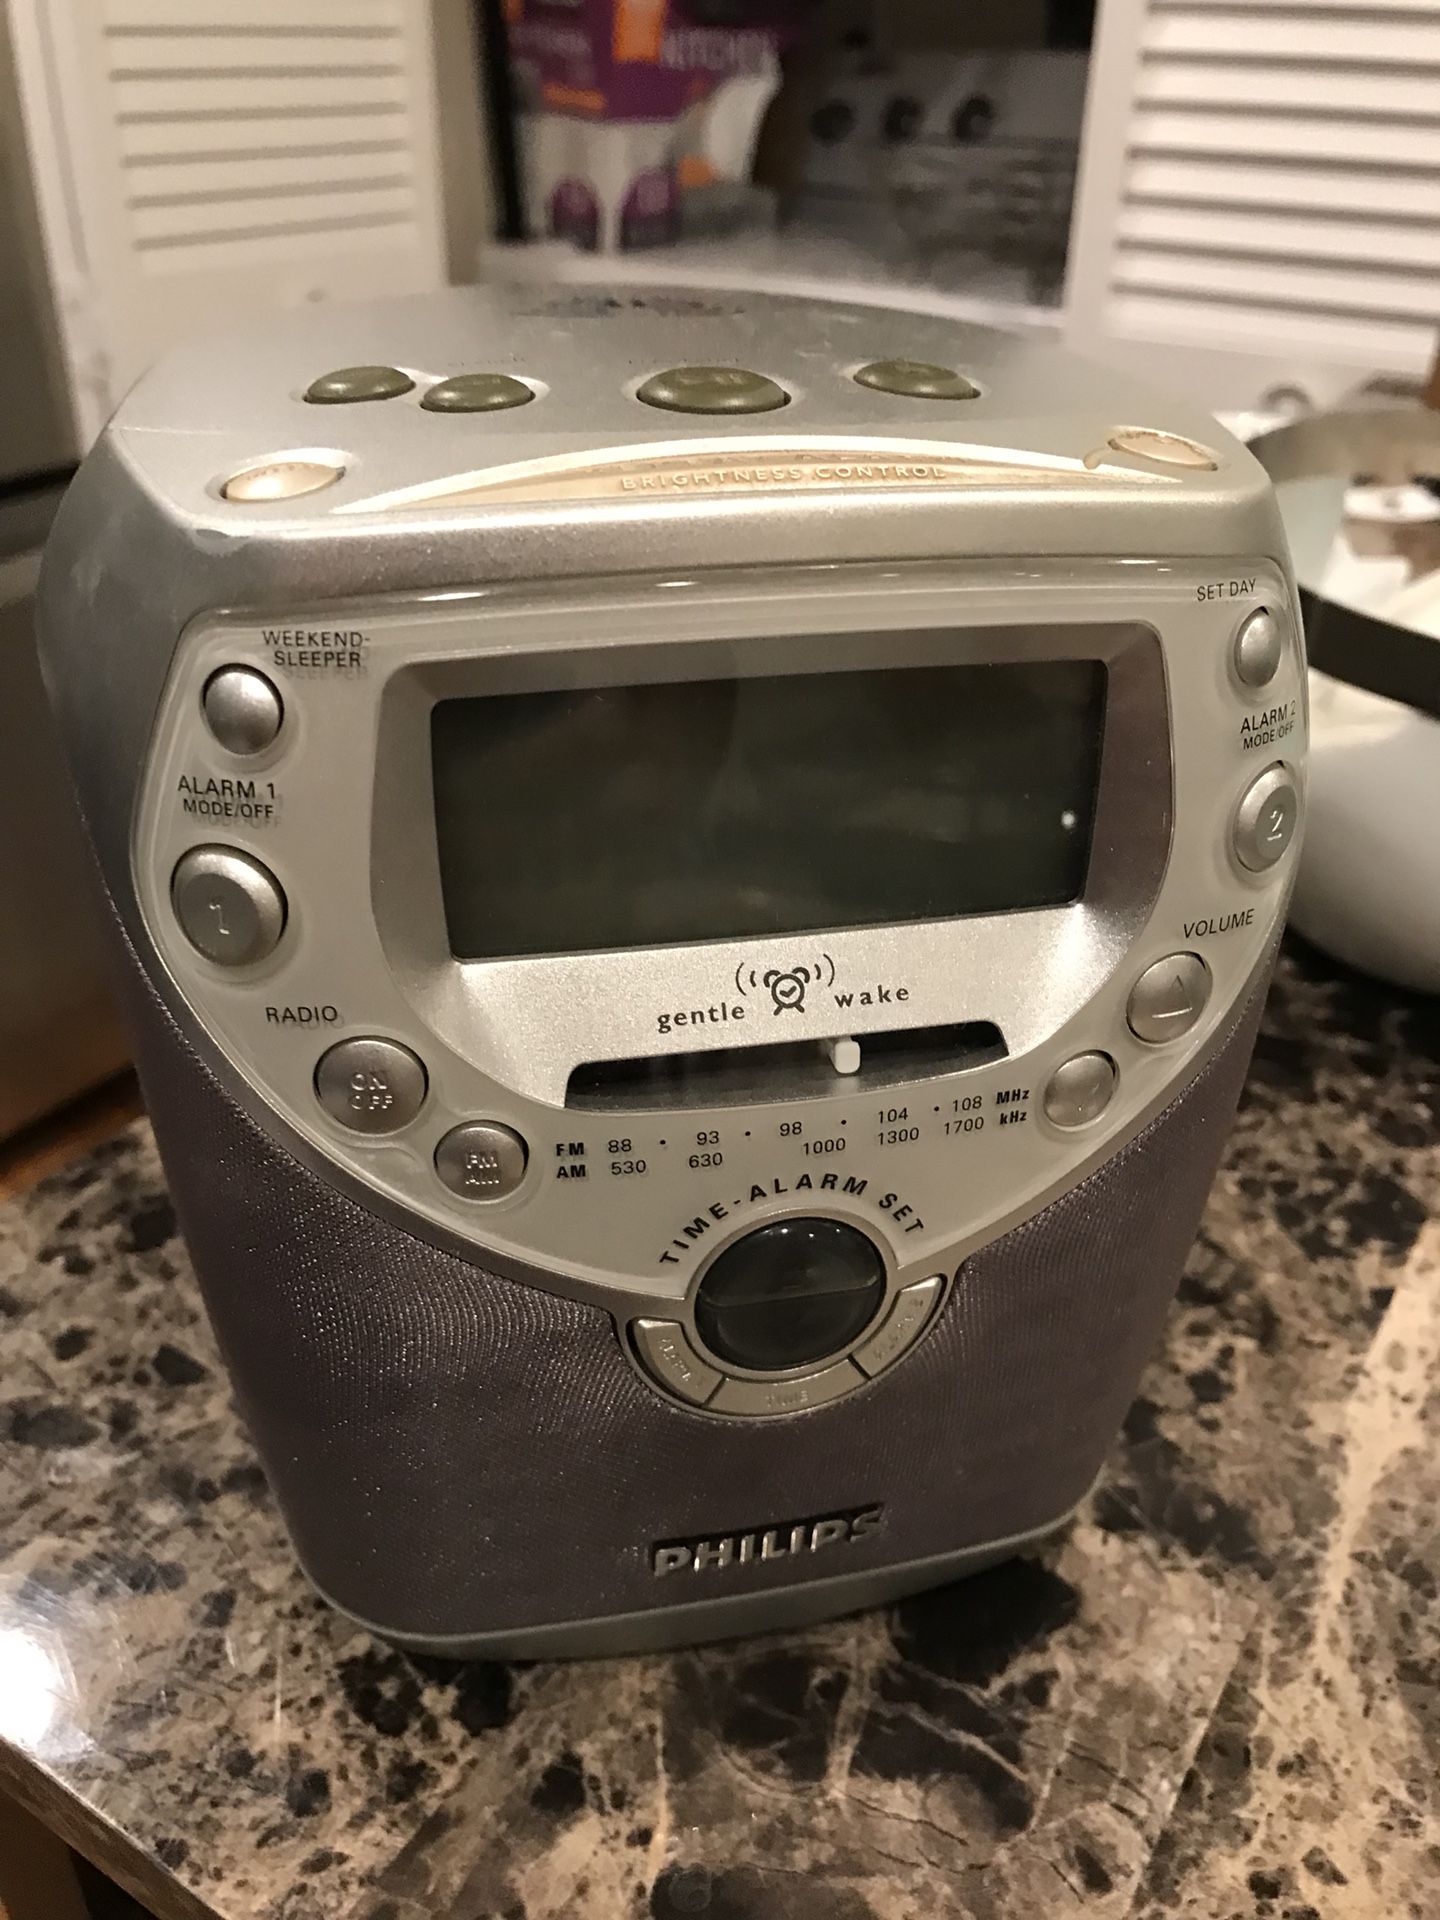 Alarm / CD and radio player from Toshiba (Super loud)